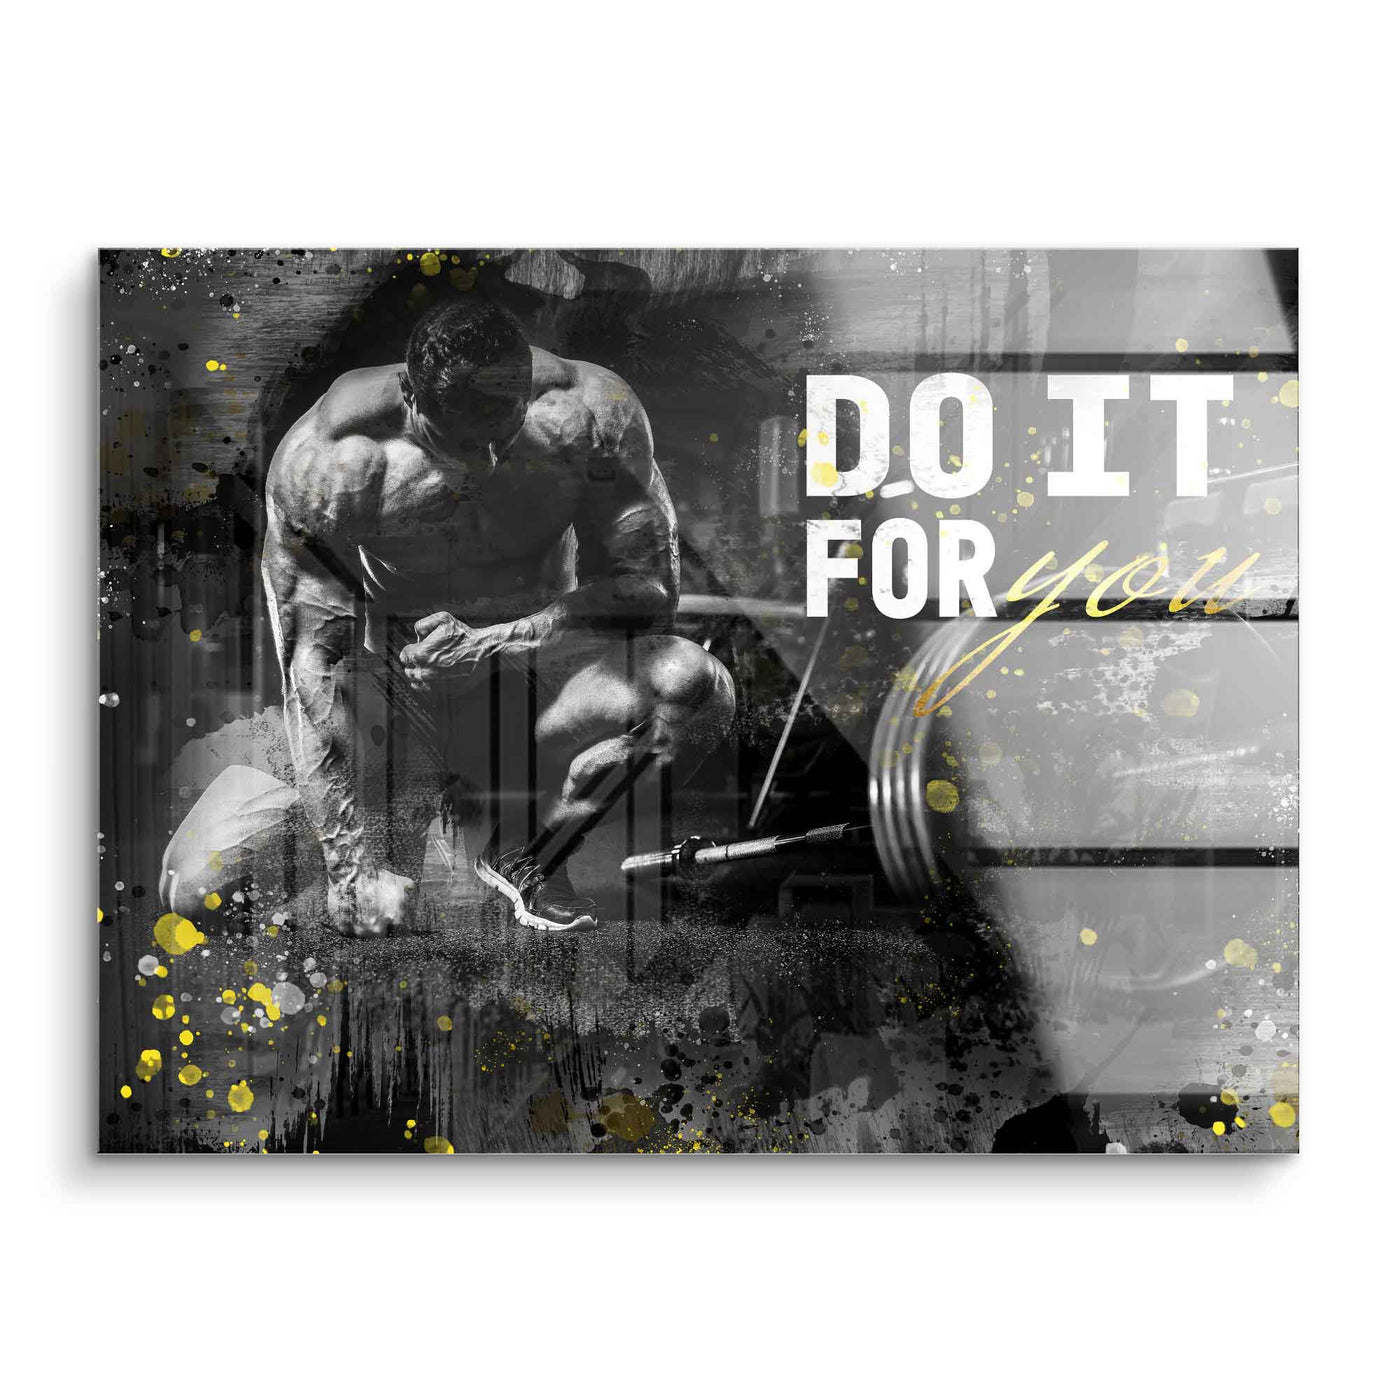 Do it for you